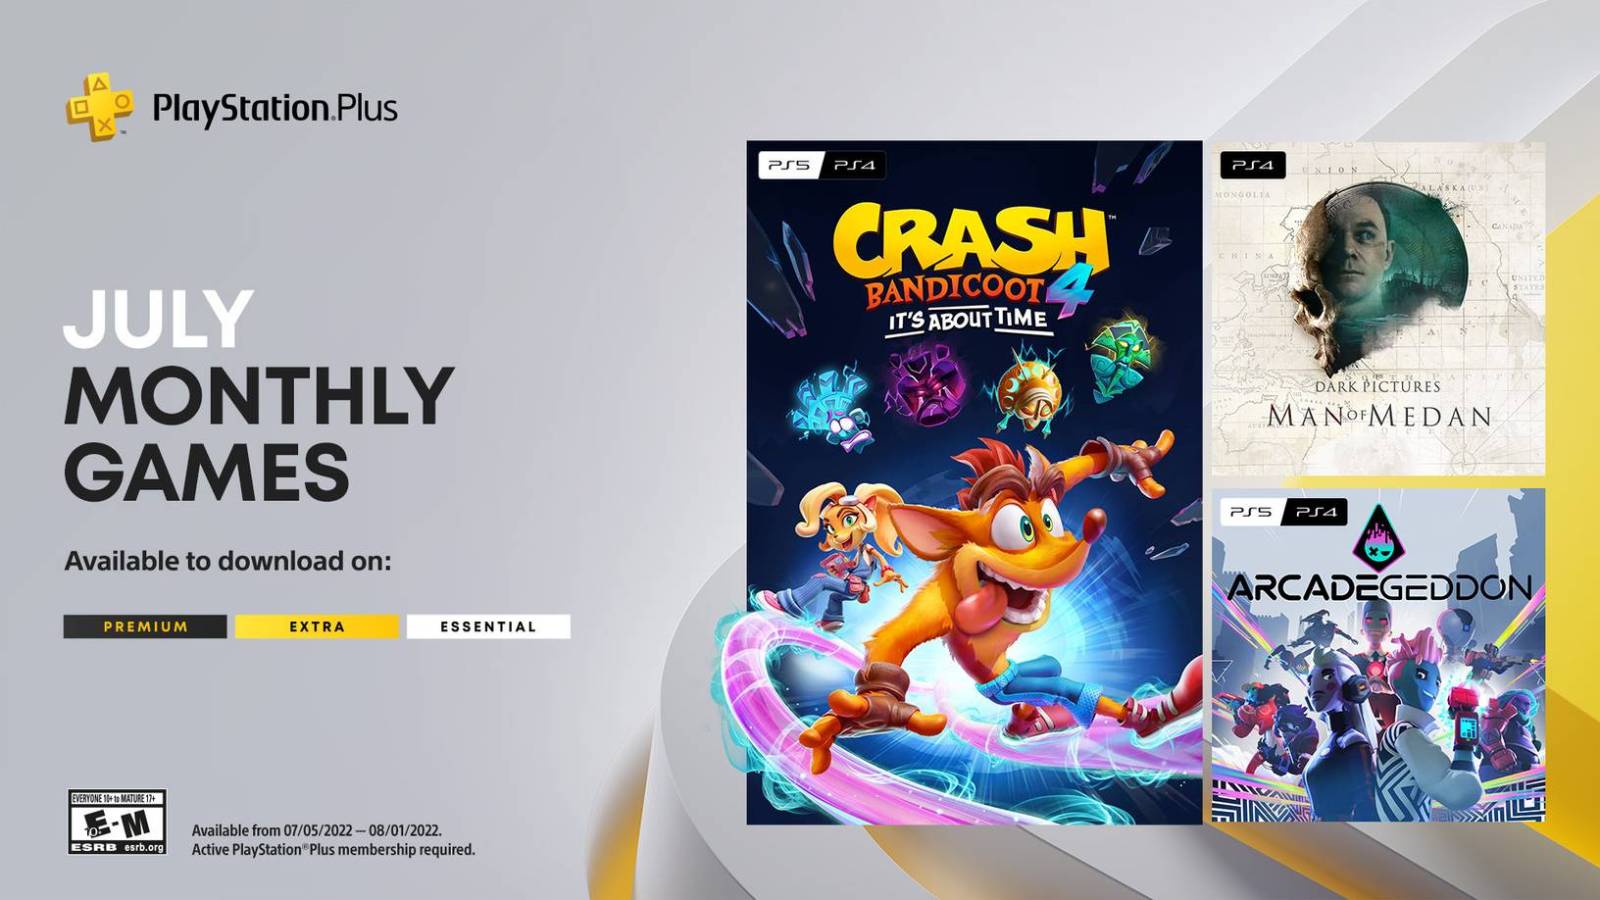 Playstation Plus free games for July 2022